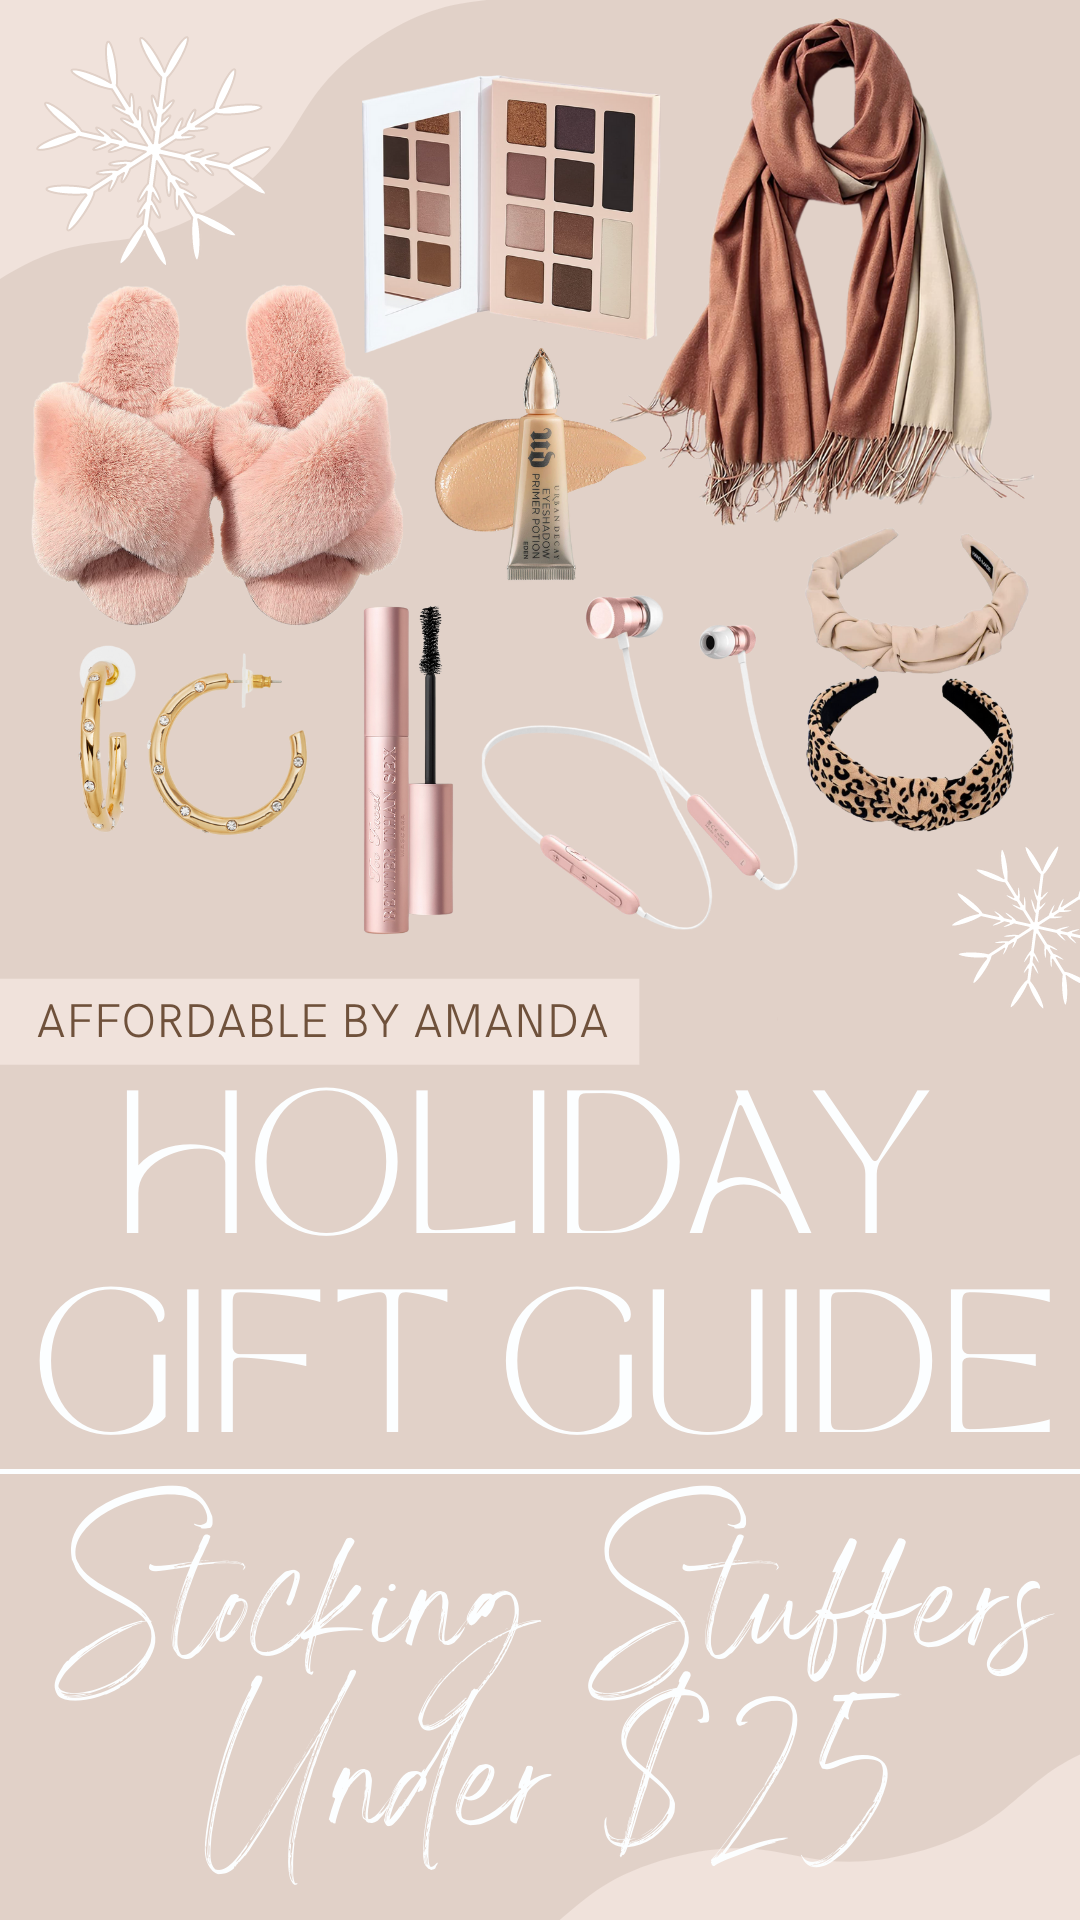 Stocking Stuffer Ideas 2021. Holiday Gift Guide: Stocking Stuffers Under 25. The Best Stocking Stuffer Ideas 2021. 